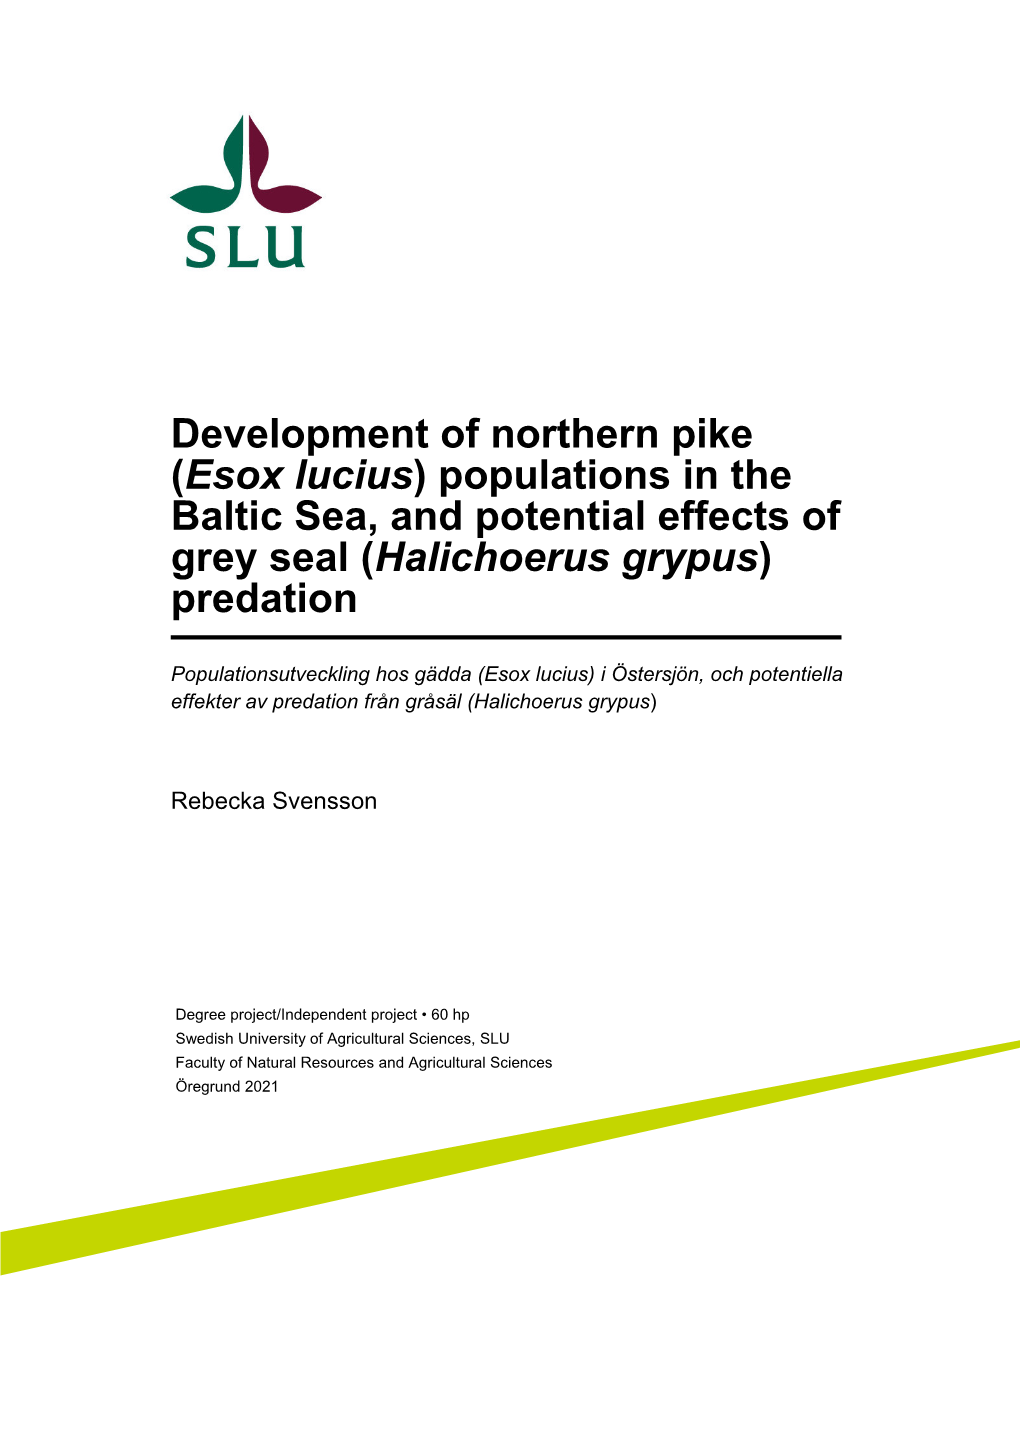 Esox Lucius) Populations in the Baltic Sea, and Potential Effects of Grey Seal (Halichoerus Grypus) Predation